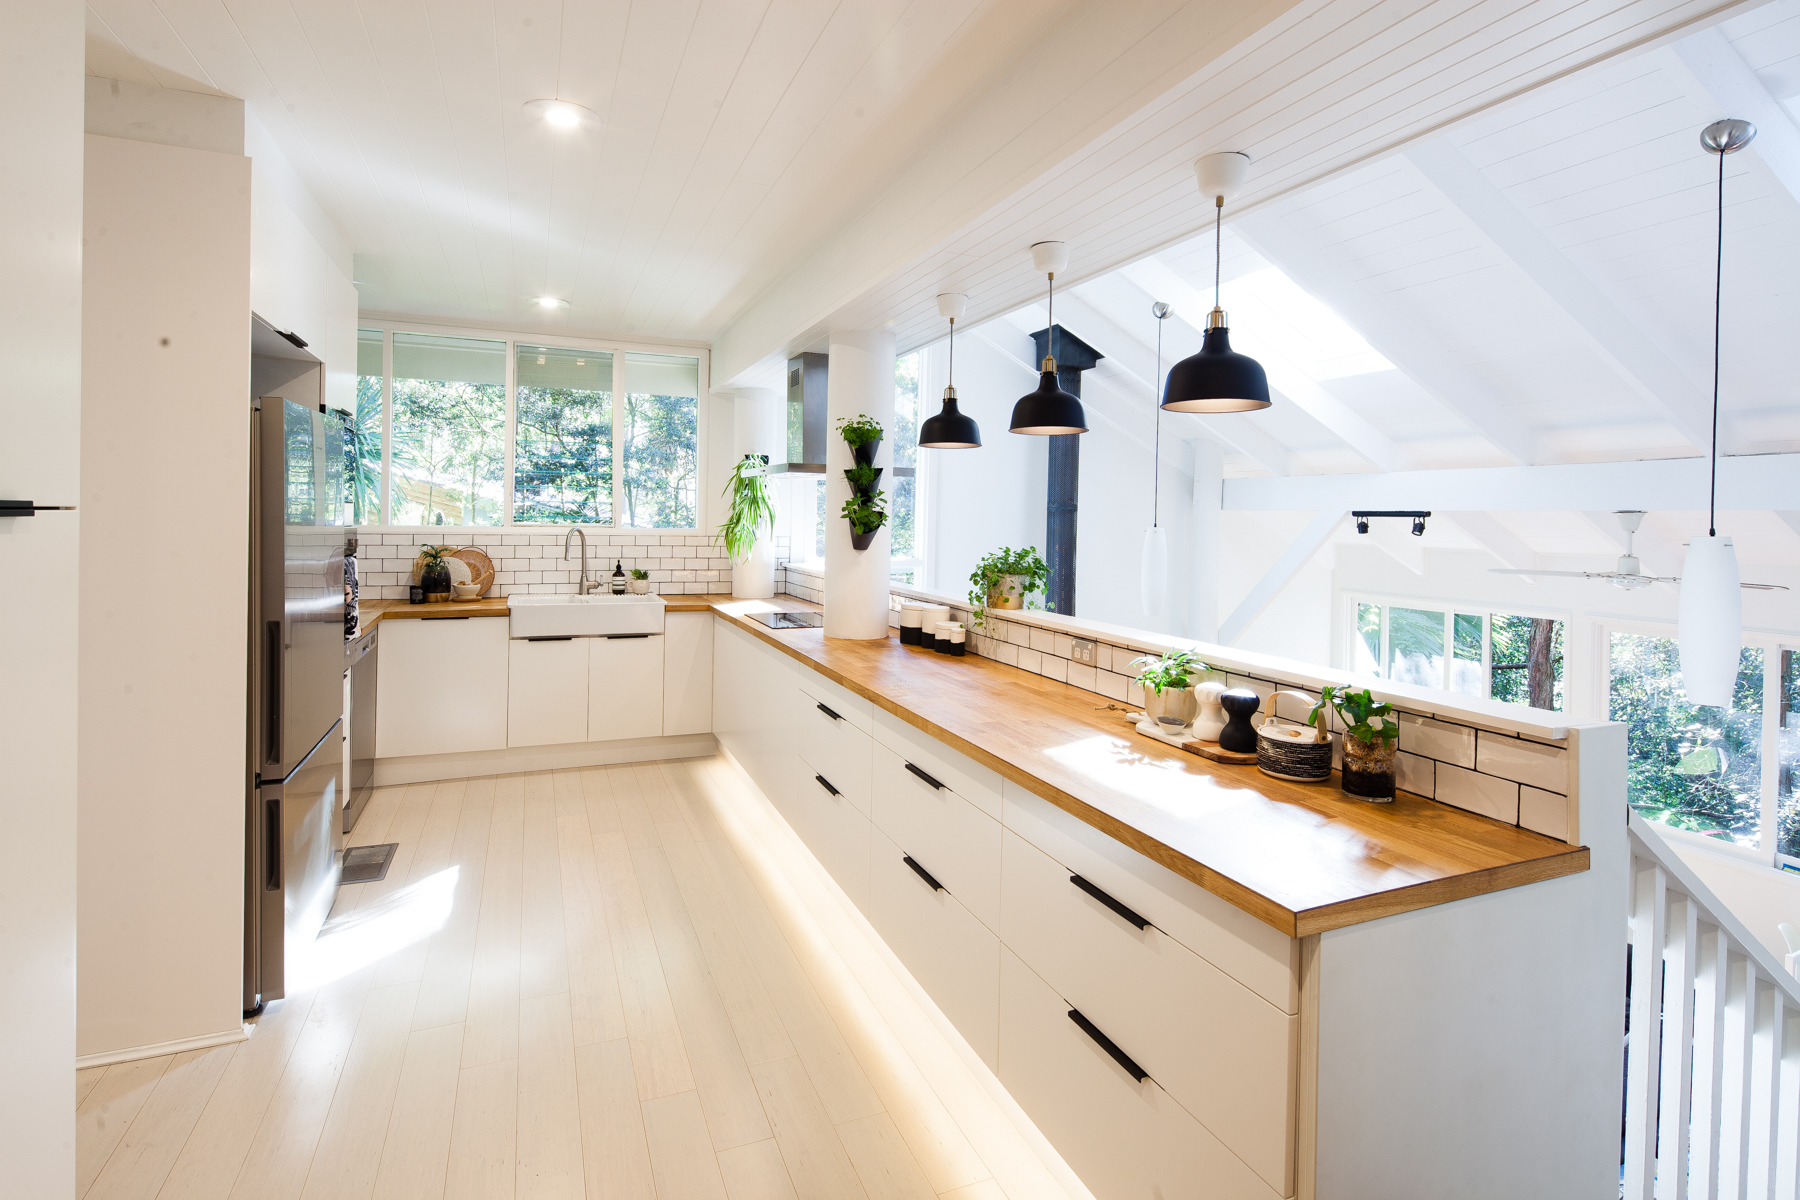 A Sydney blogger's light-filled and lovely IKEA kitchen - The Interiors